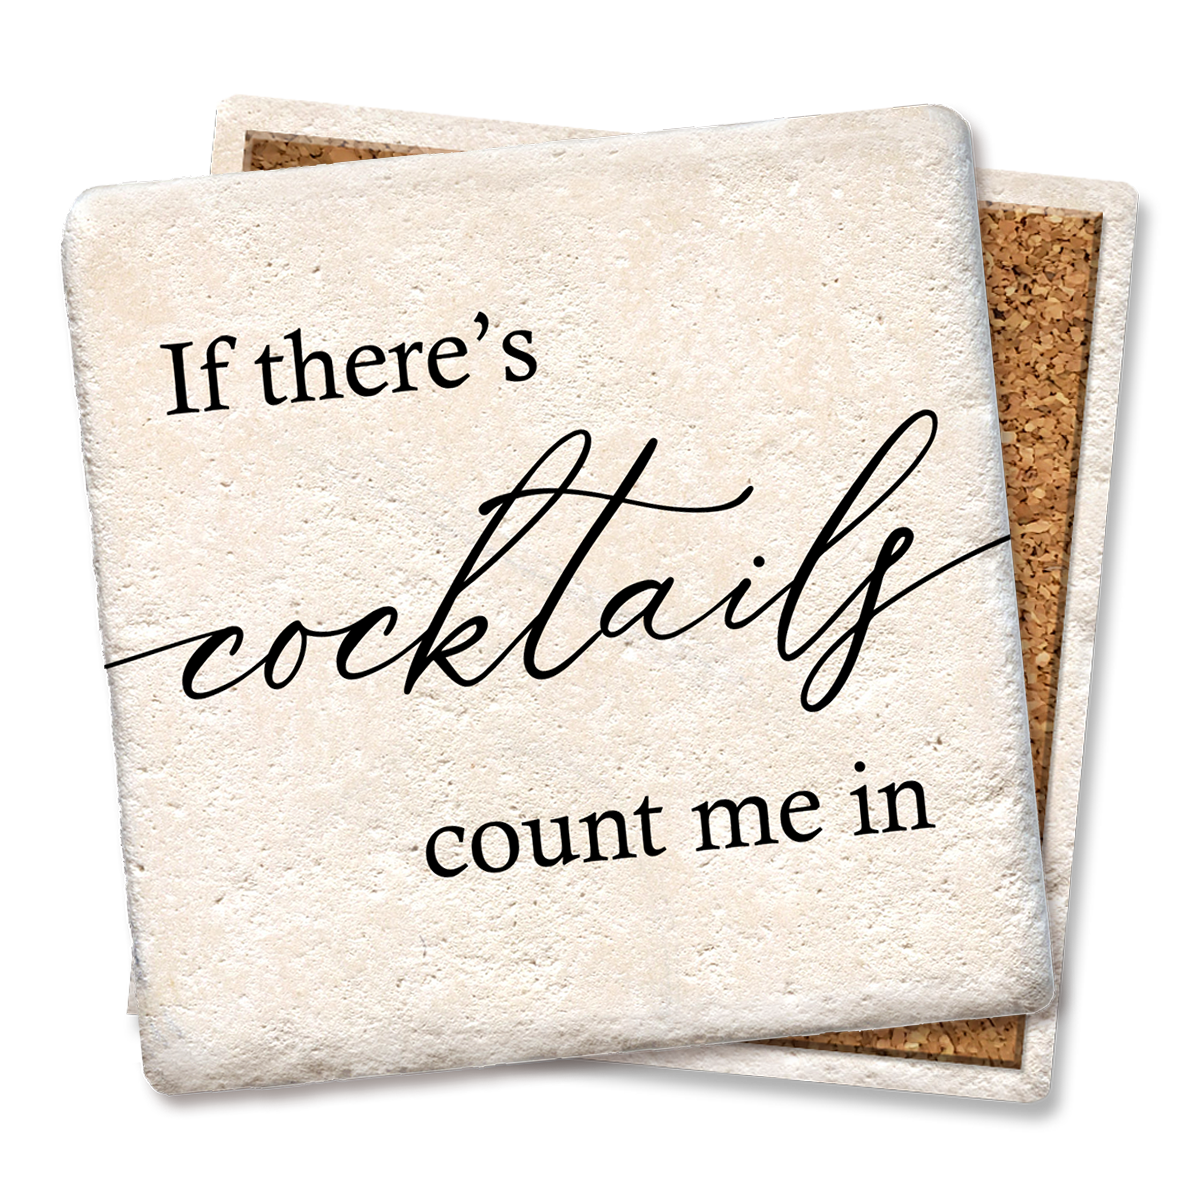 If there's Cocktails Coaster  Tipsy Coasters & Gifts   